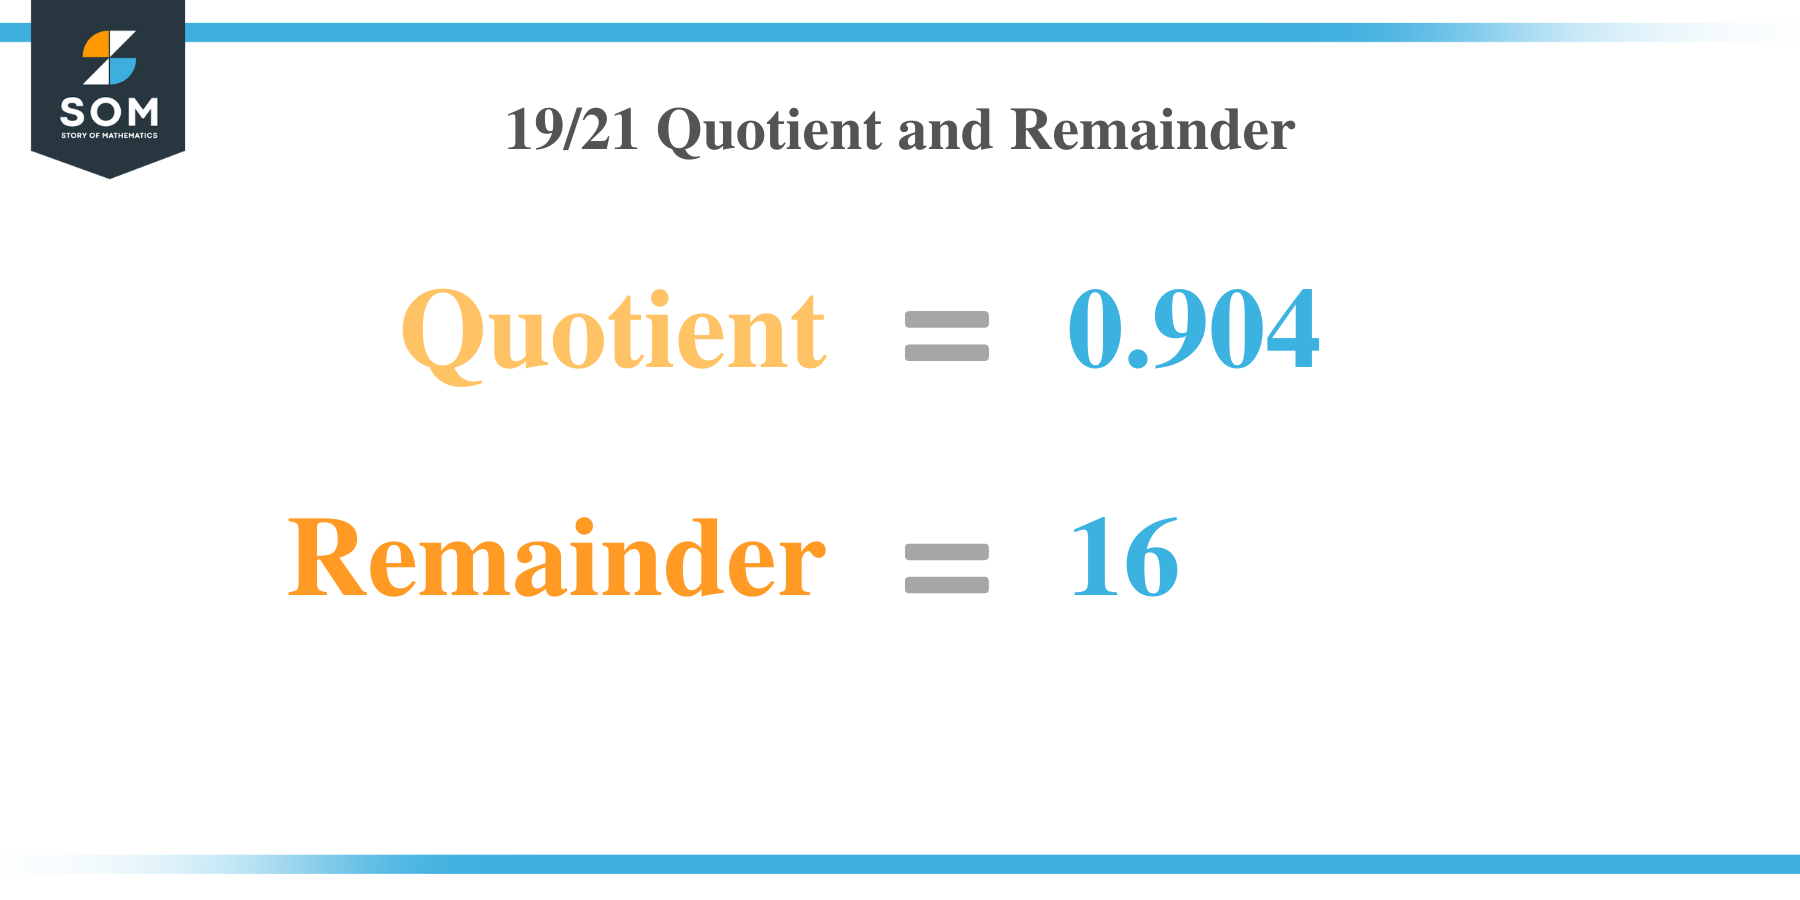 19 by 21 Quotient and Remainder